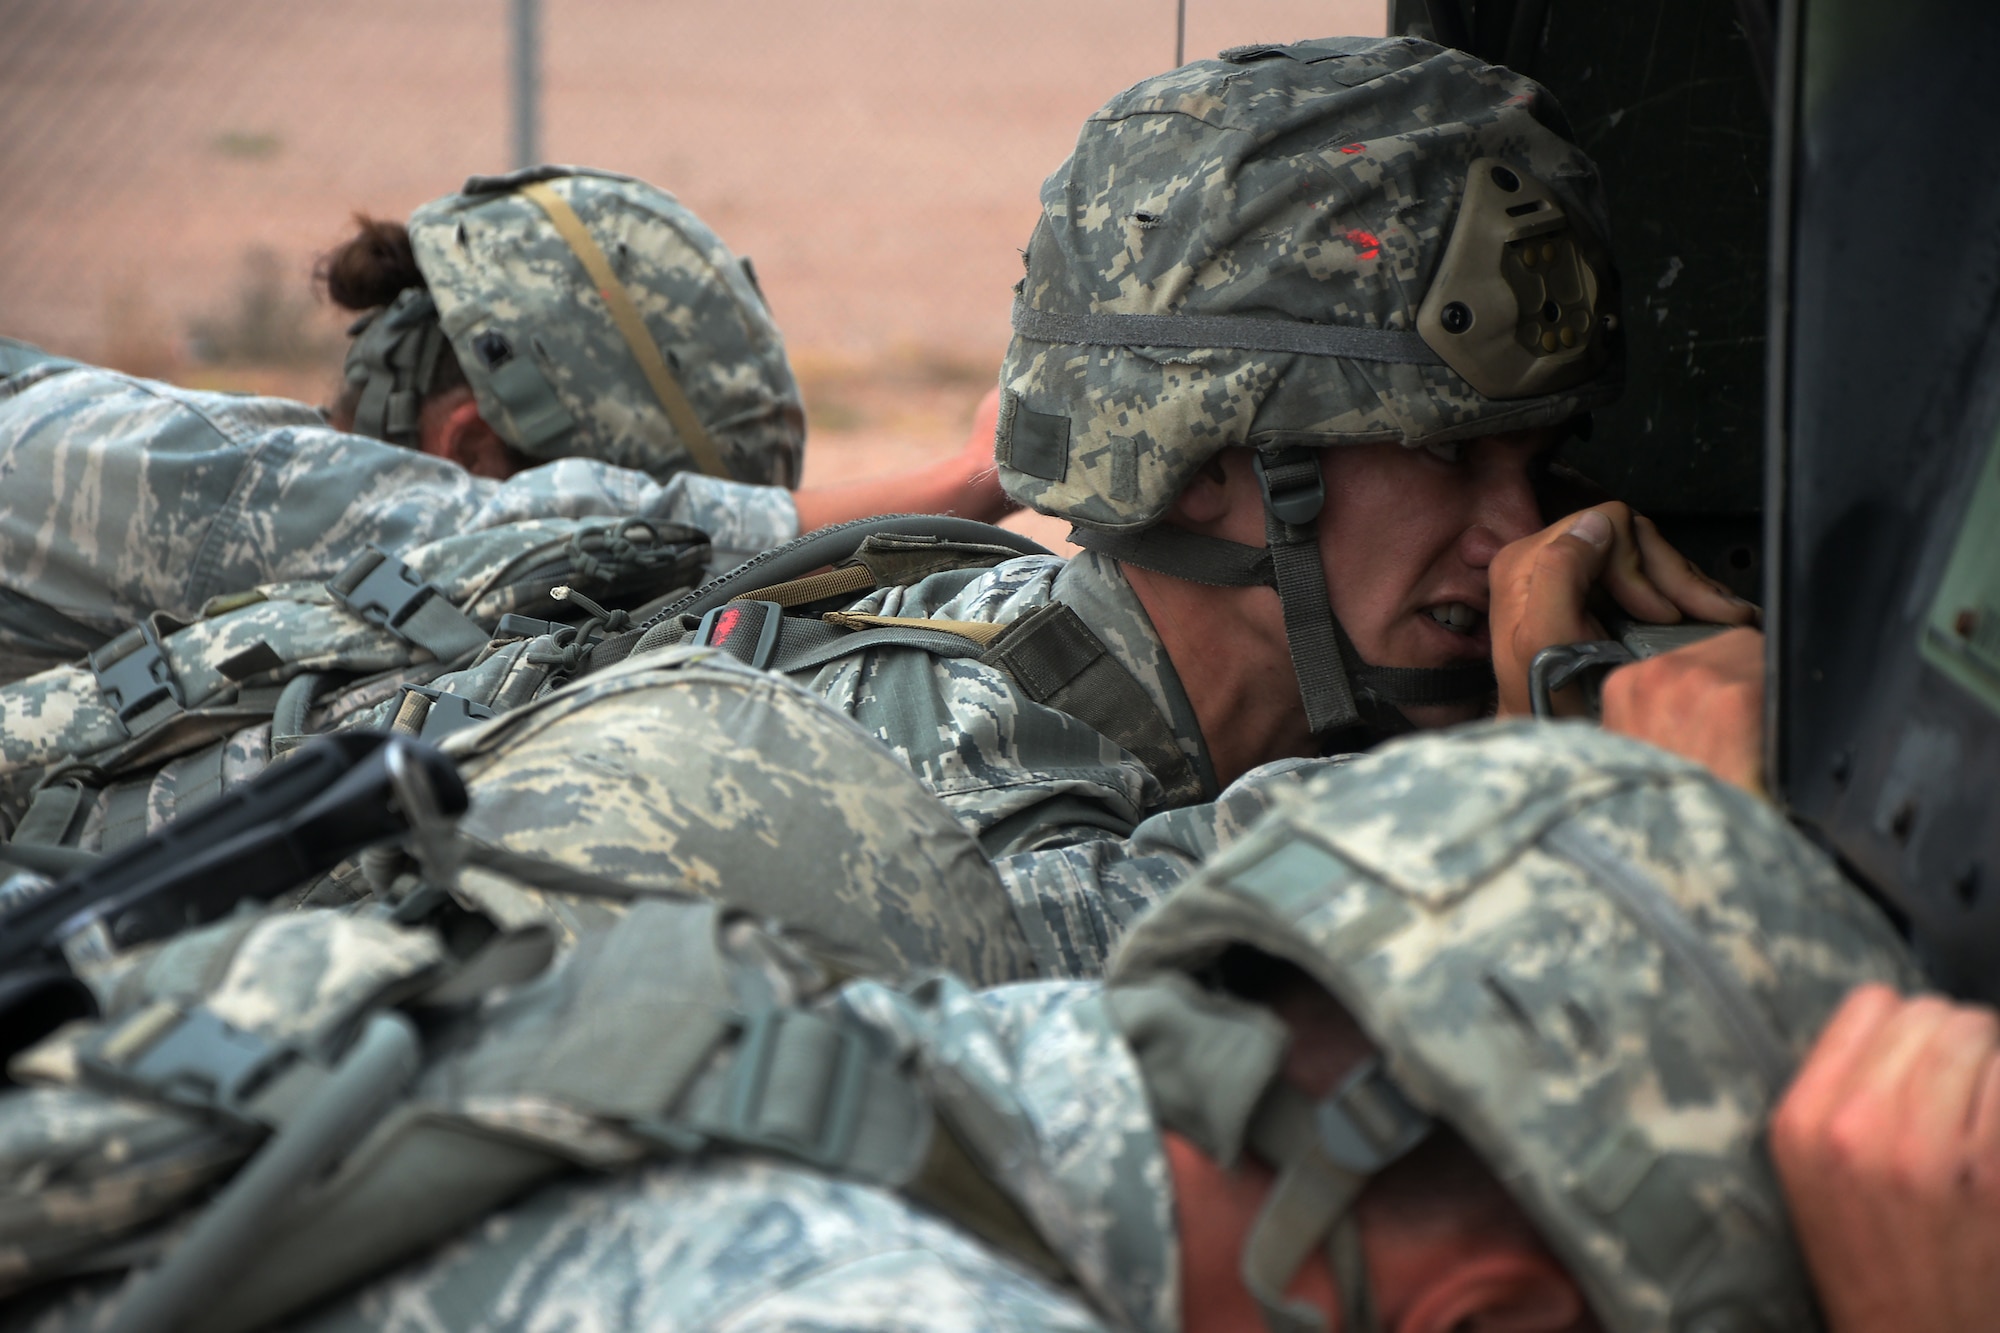 Airman 1st Class Samuel O’Brian, 377th Air Base Wing, Kirtland Air Force Base, N.M., and the 377th ABW team pushes a Humvee 100 yards Sept. 34, 2015, during the warrior run portion of the 2015 Global Strike Challenge on Camp Guernsey, Wyo. The run was the final part of a four day competition which put 10 teams from eight bases head-to-head to determine who is the best of the best. (U.S. Air Force photo by Senior Airman Brandon Valle)